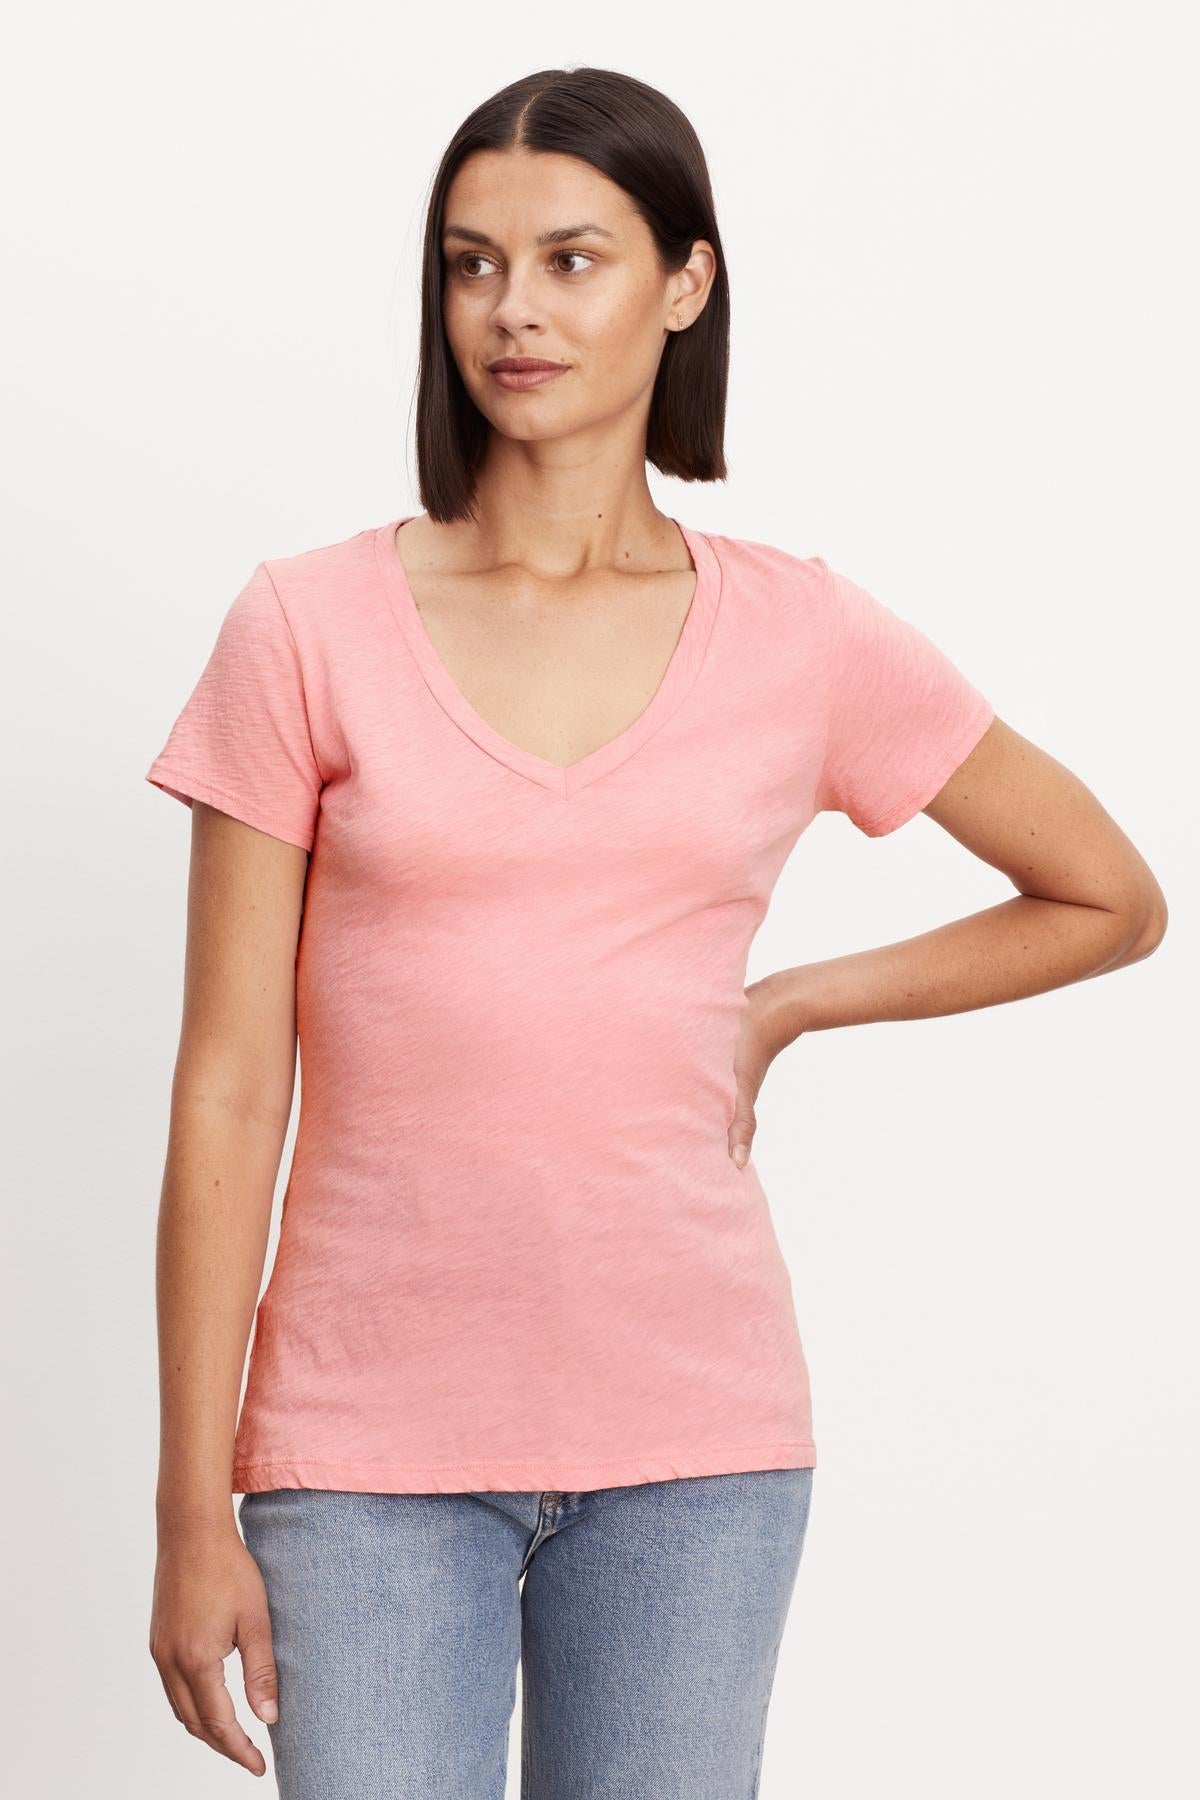 A woman sporting a preppy tomboy style in a pink LILITH COTTON SLUB V-NECK TEE by Velvet by Graham & Spencer.-36320782516417